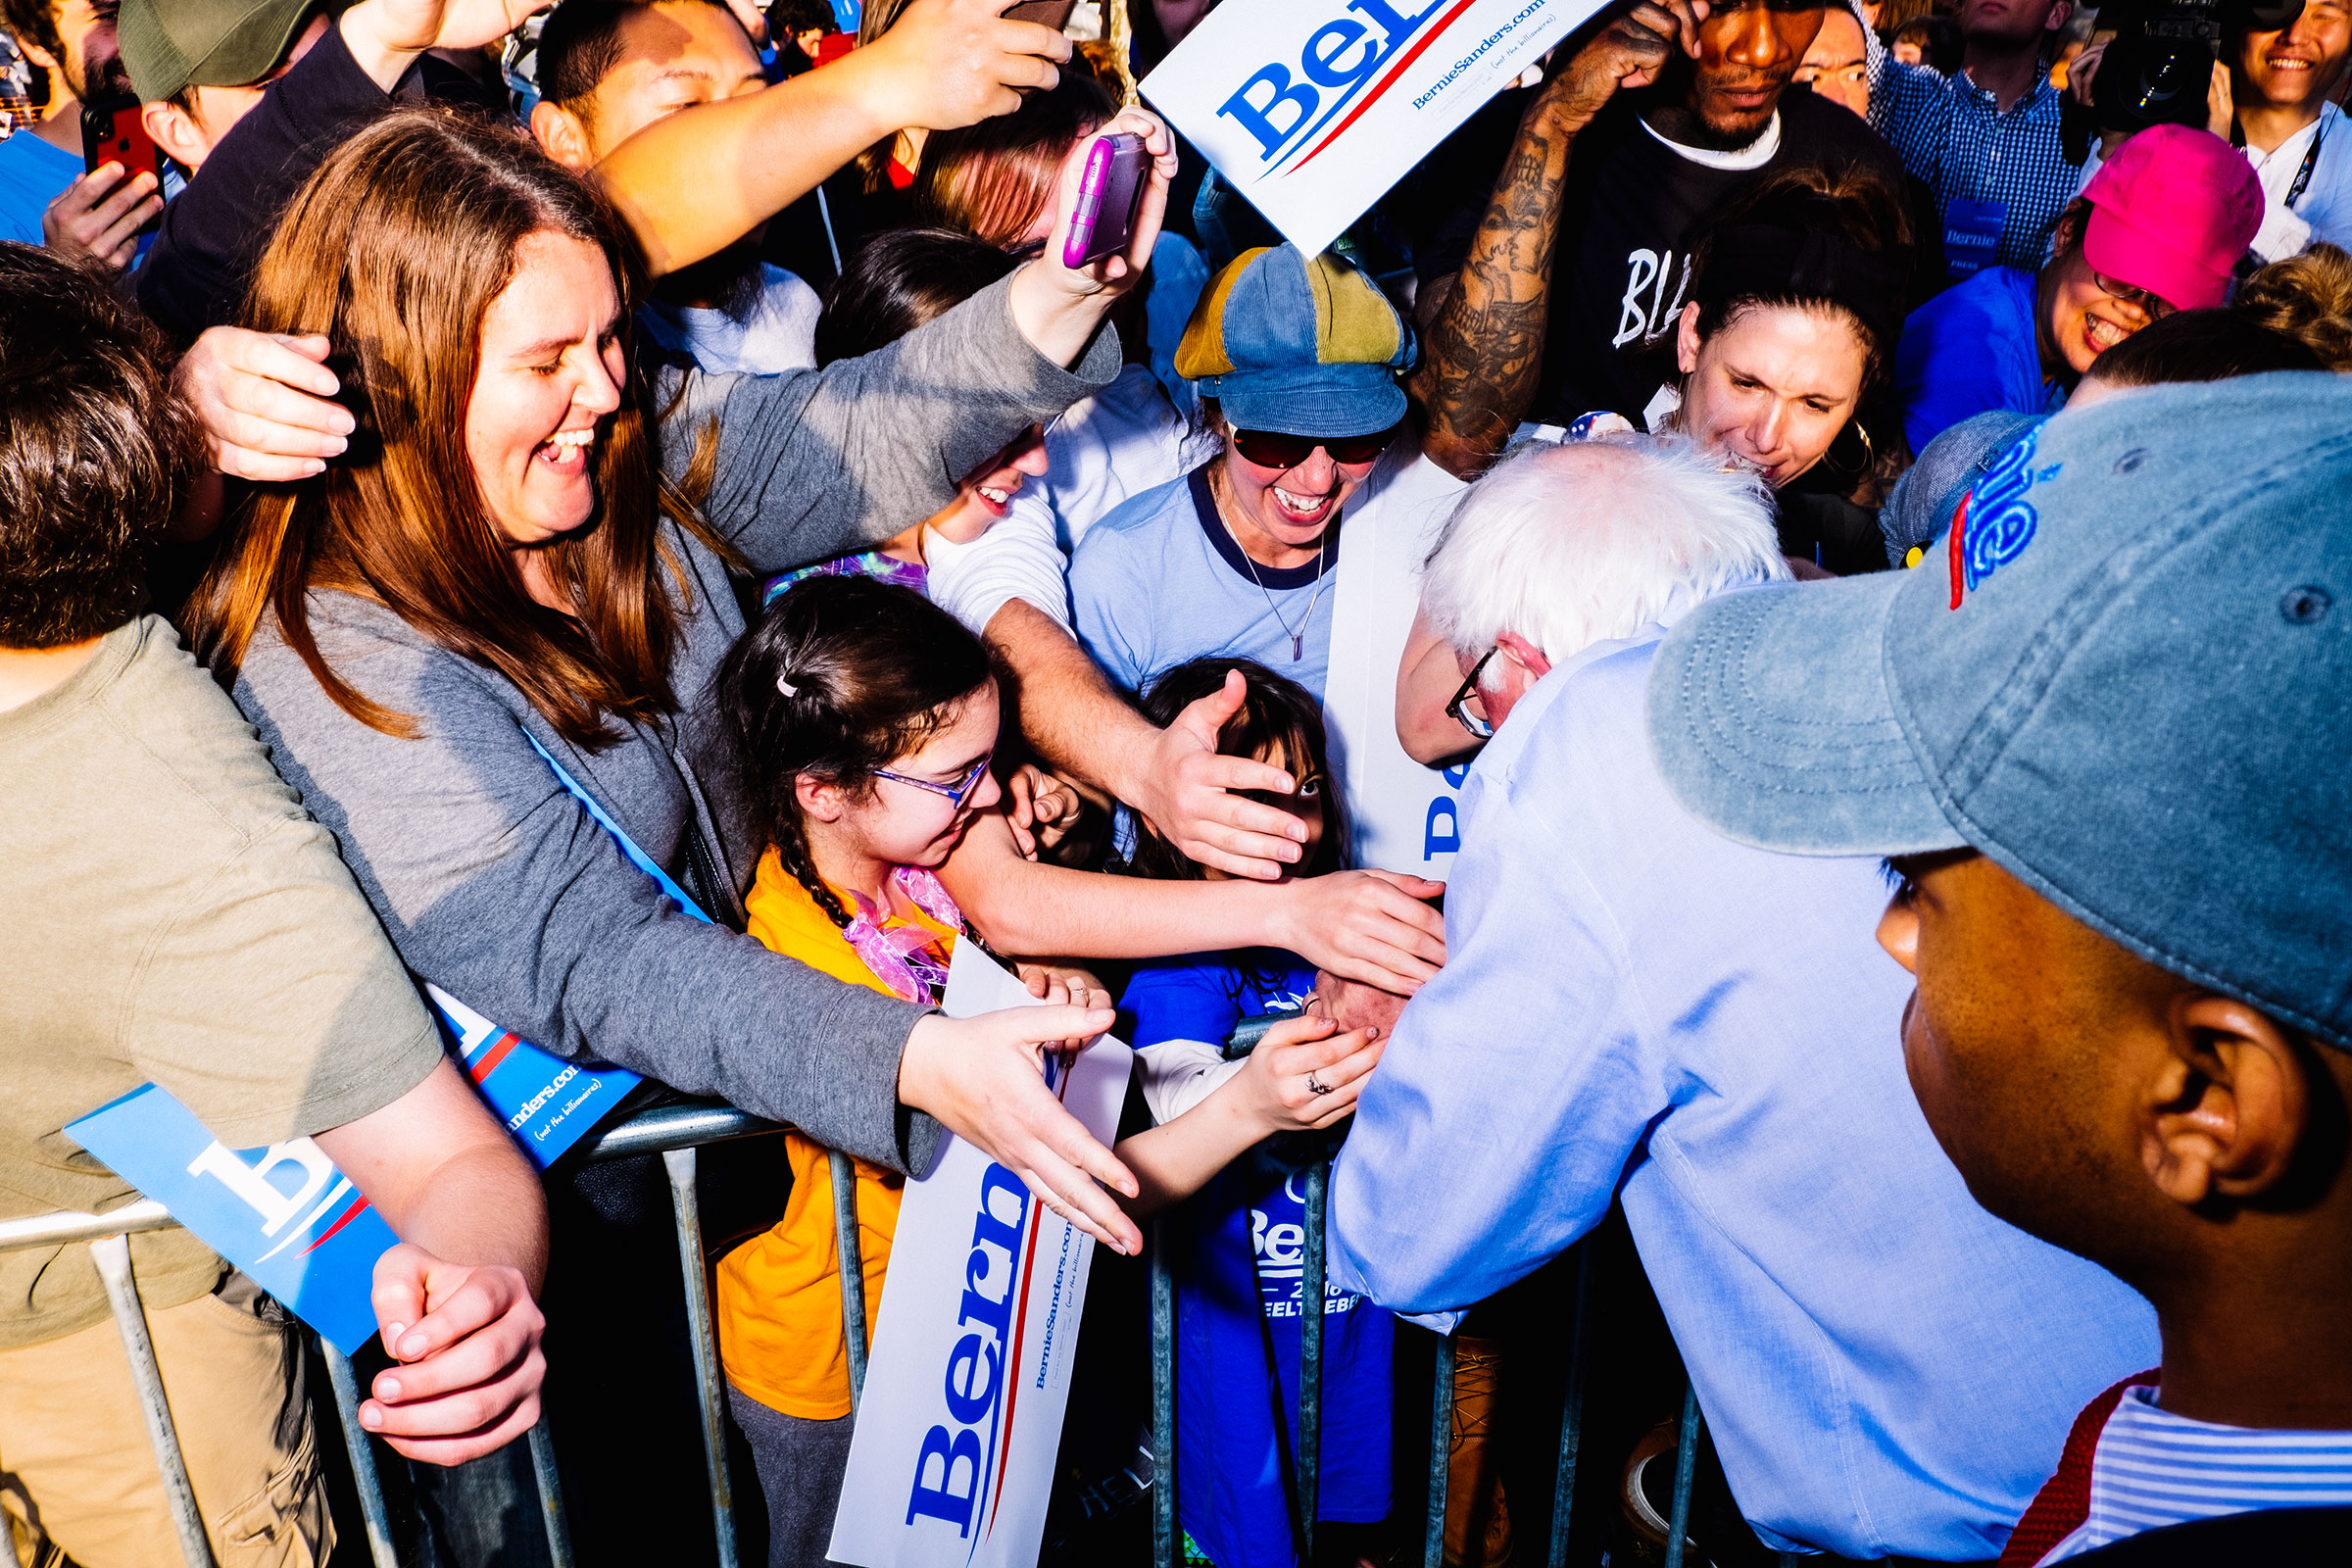 Sanders greets supporters at a rally in Pittsburgh (Devin Yalkin for TIME)